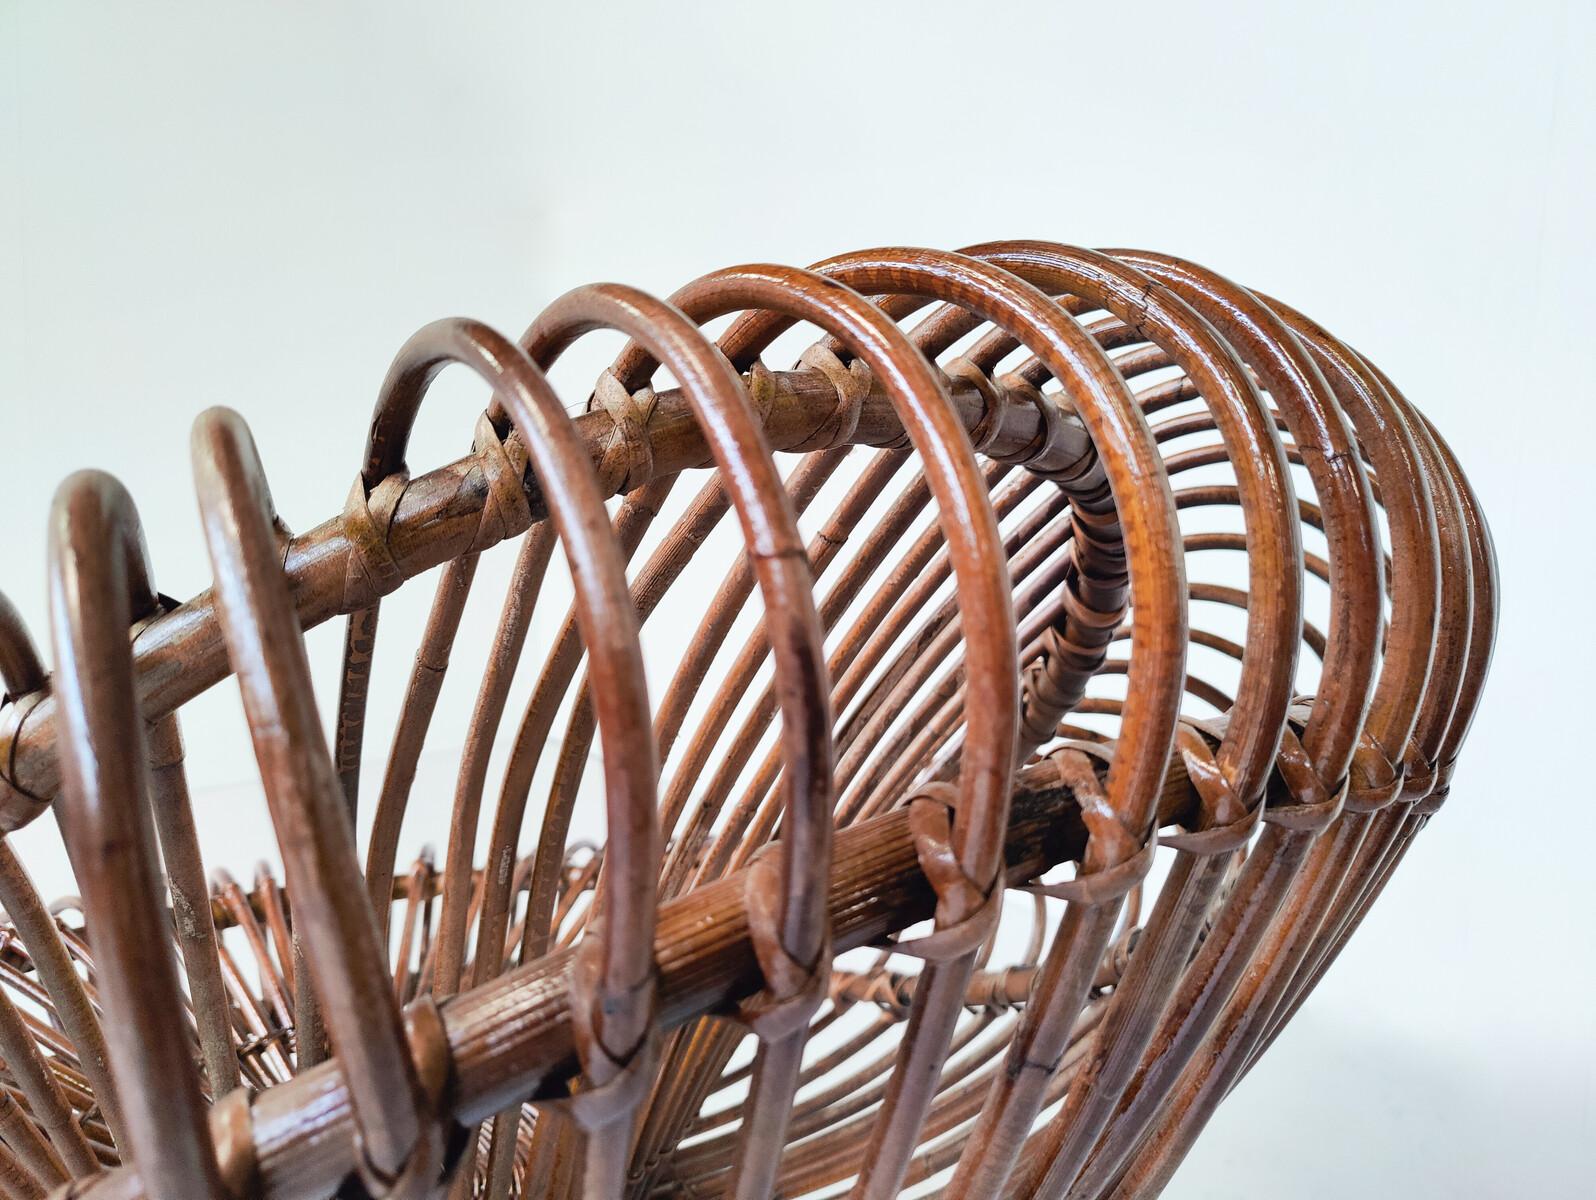 Rattan Mid-Century Modern Pair of Chairs by Janine Abraham & Dirk Jan Rol for Rougier  For Sale